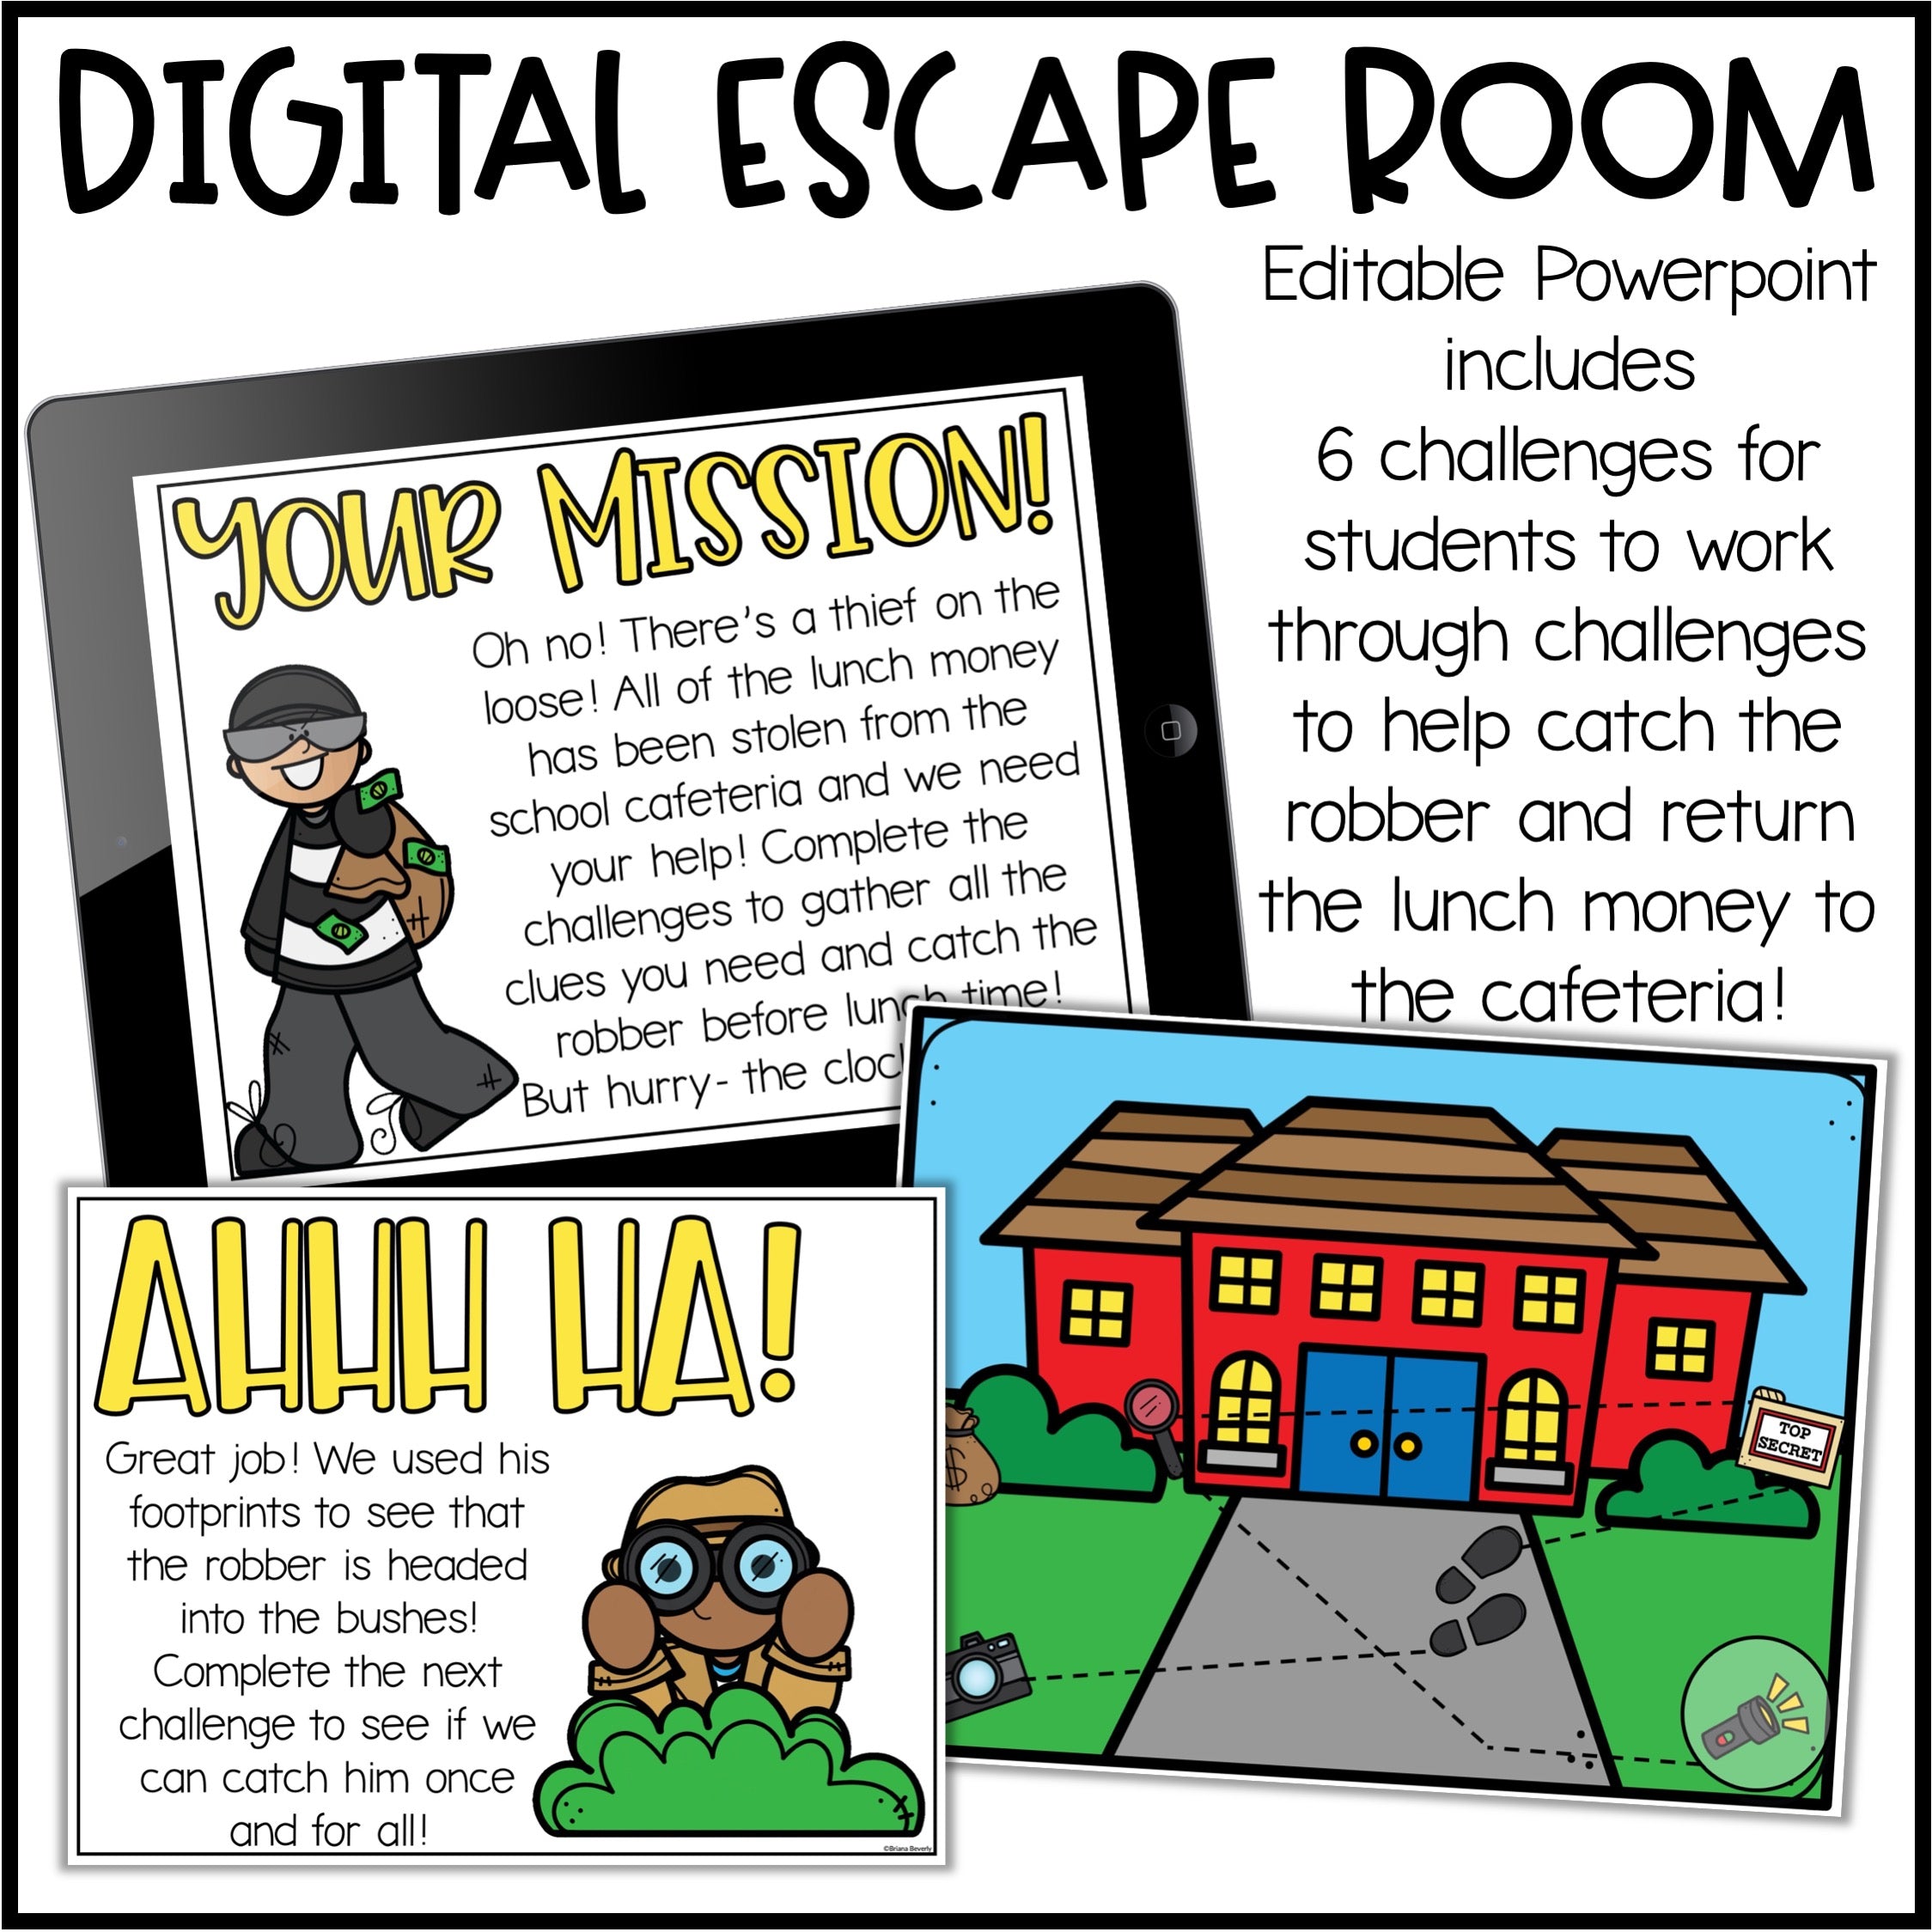 Escape Room Challenge - All You Need to Know BEFORE You Go (with